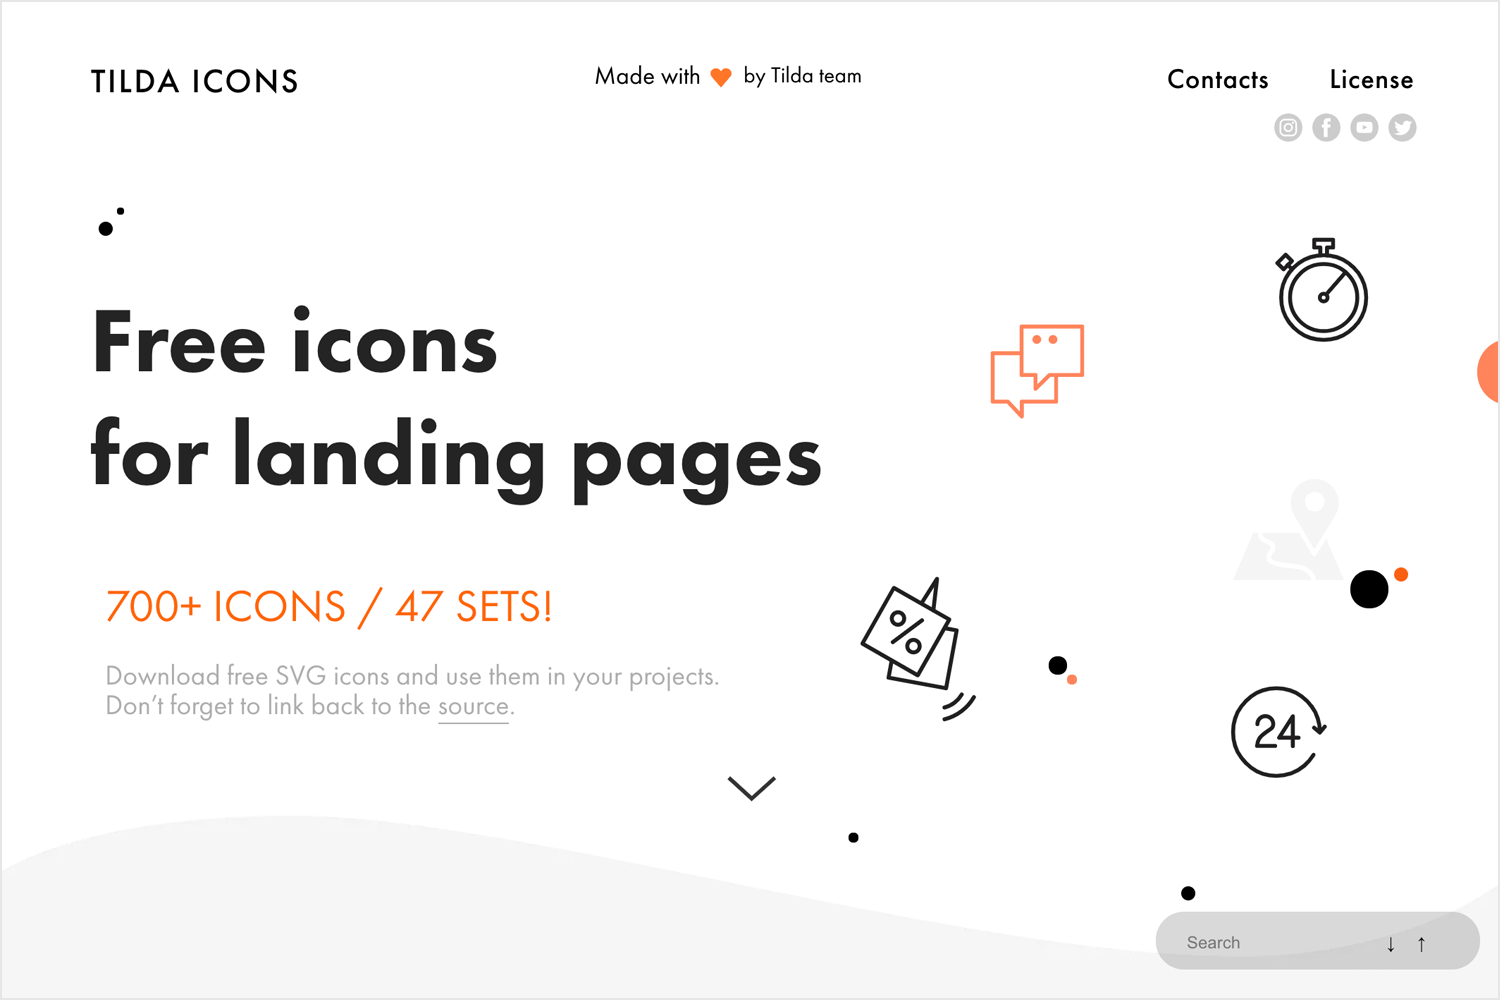 tilda publishing as a place for free icons